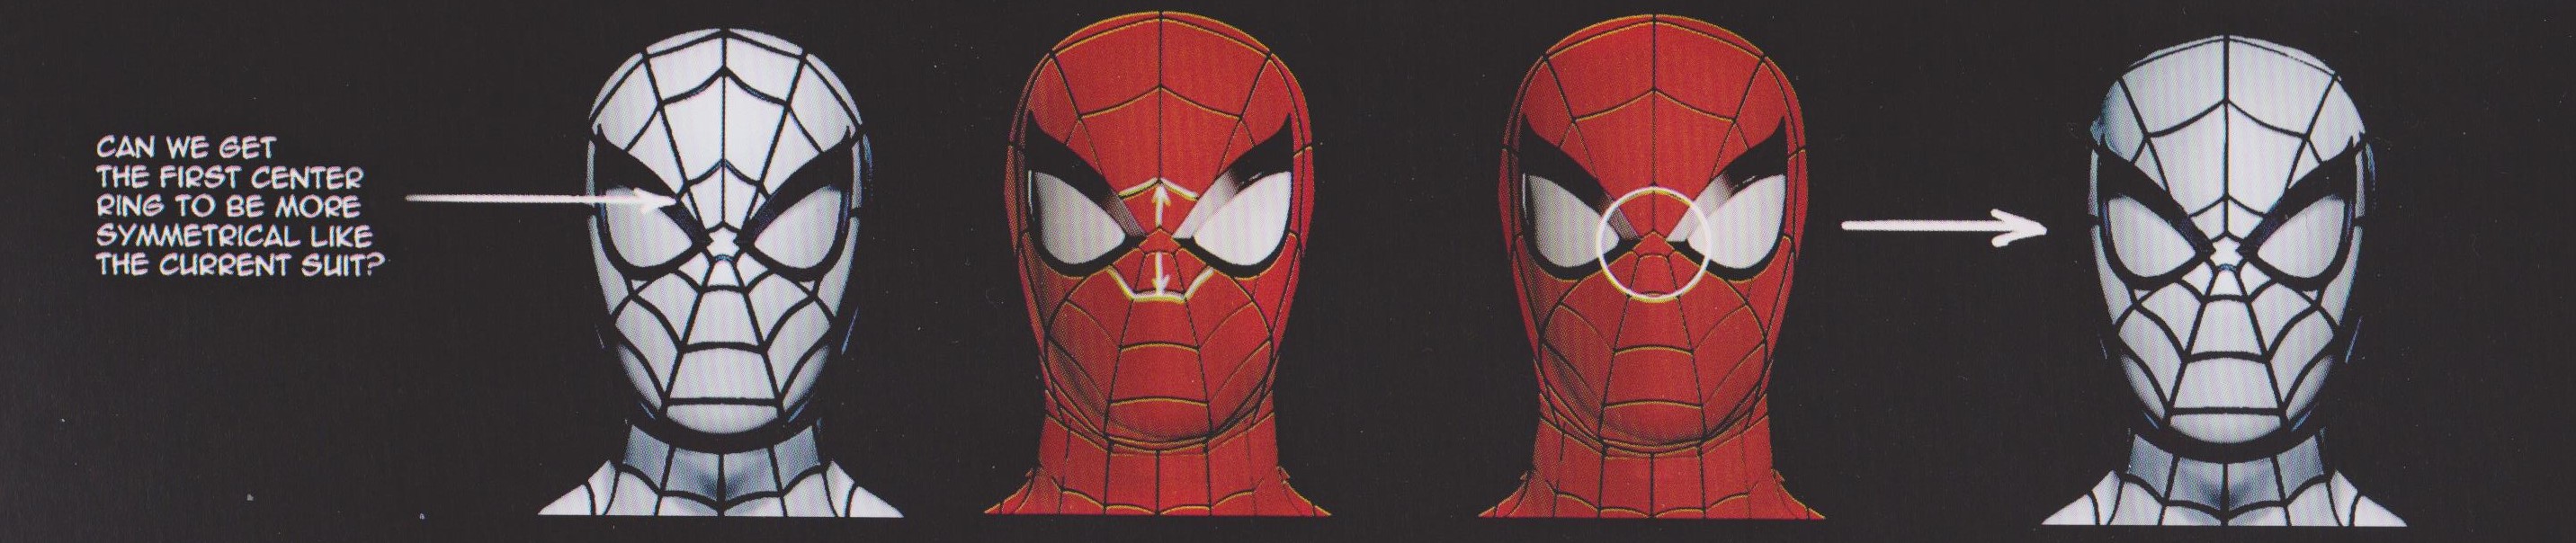 SPIDER-MAN PS4 Concept Art Reveals Alternate Designs For The Wall